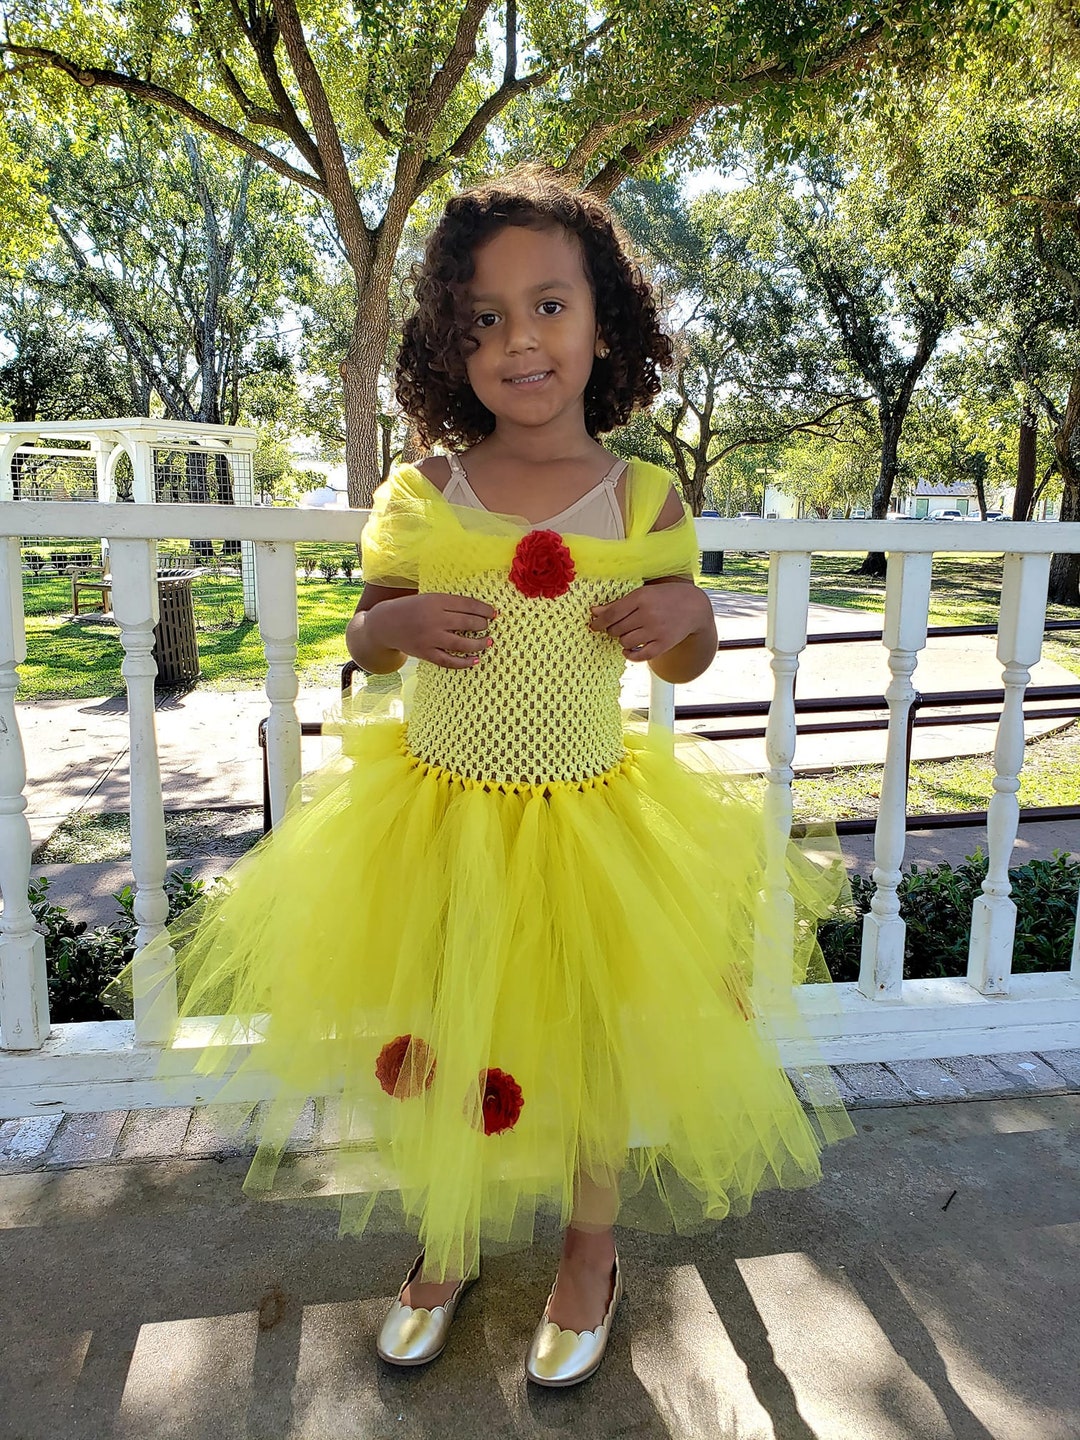 Belle Tutu Dress/beauty and the Beast/princess/inspired by - Etsy